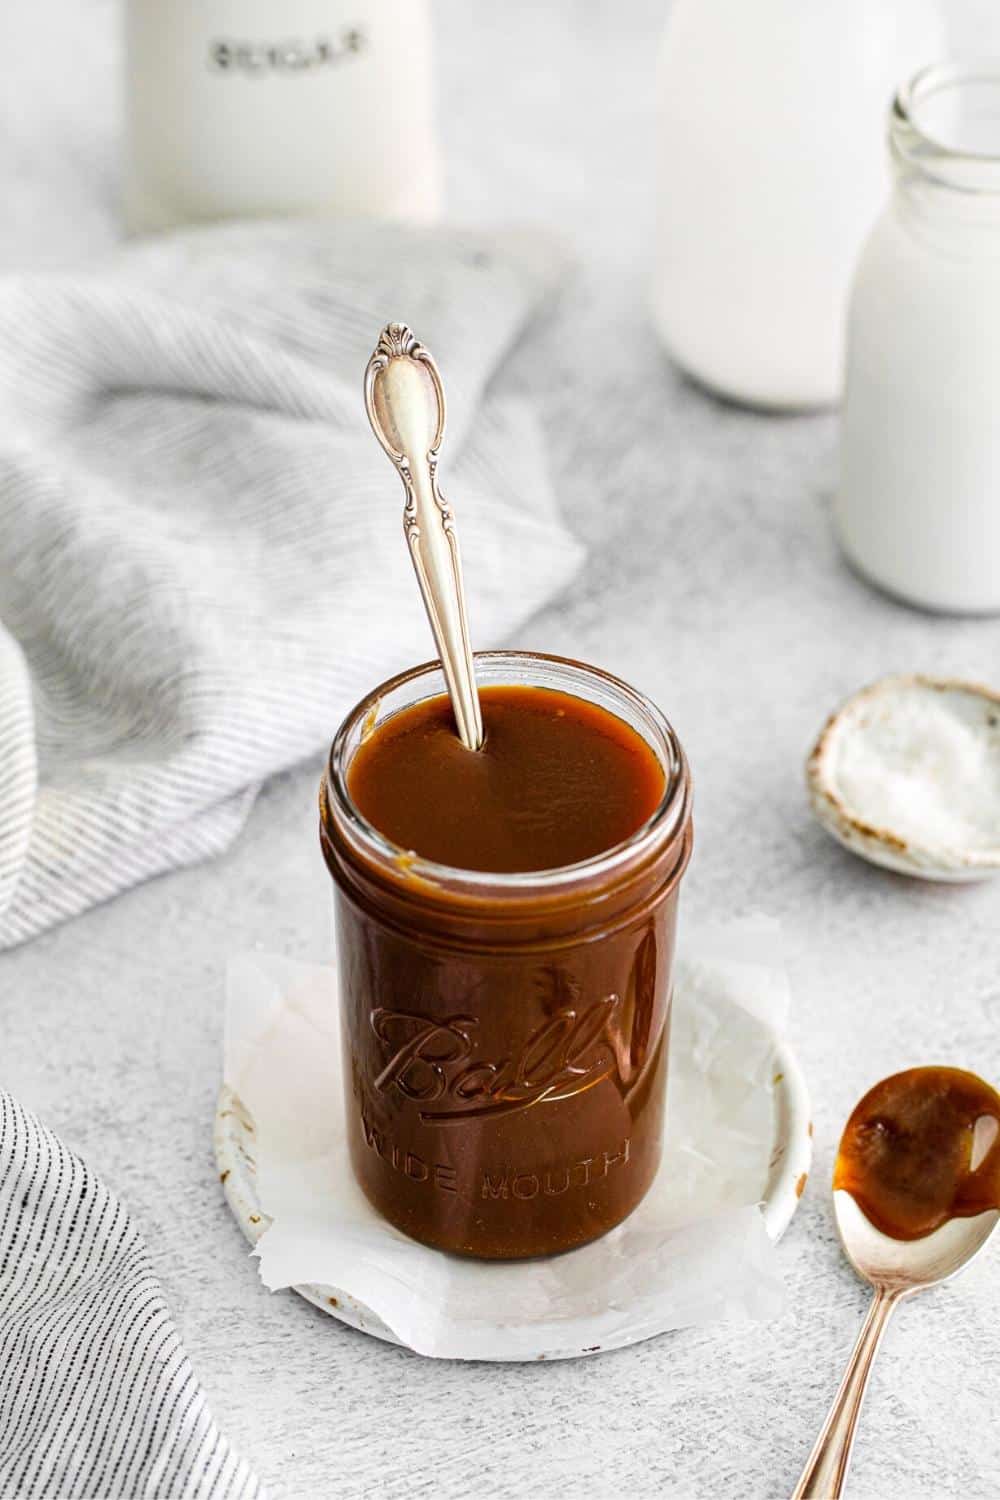 Thick homemade salted caramel sauce in a glass jar with a spoon.